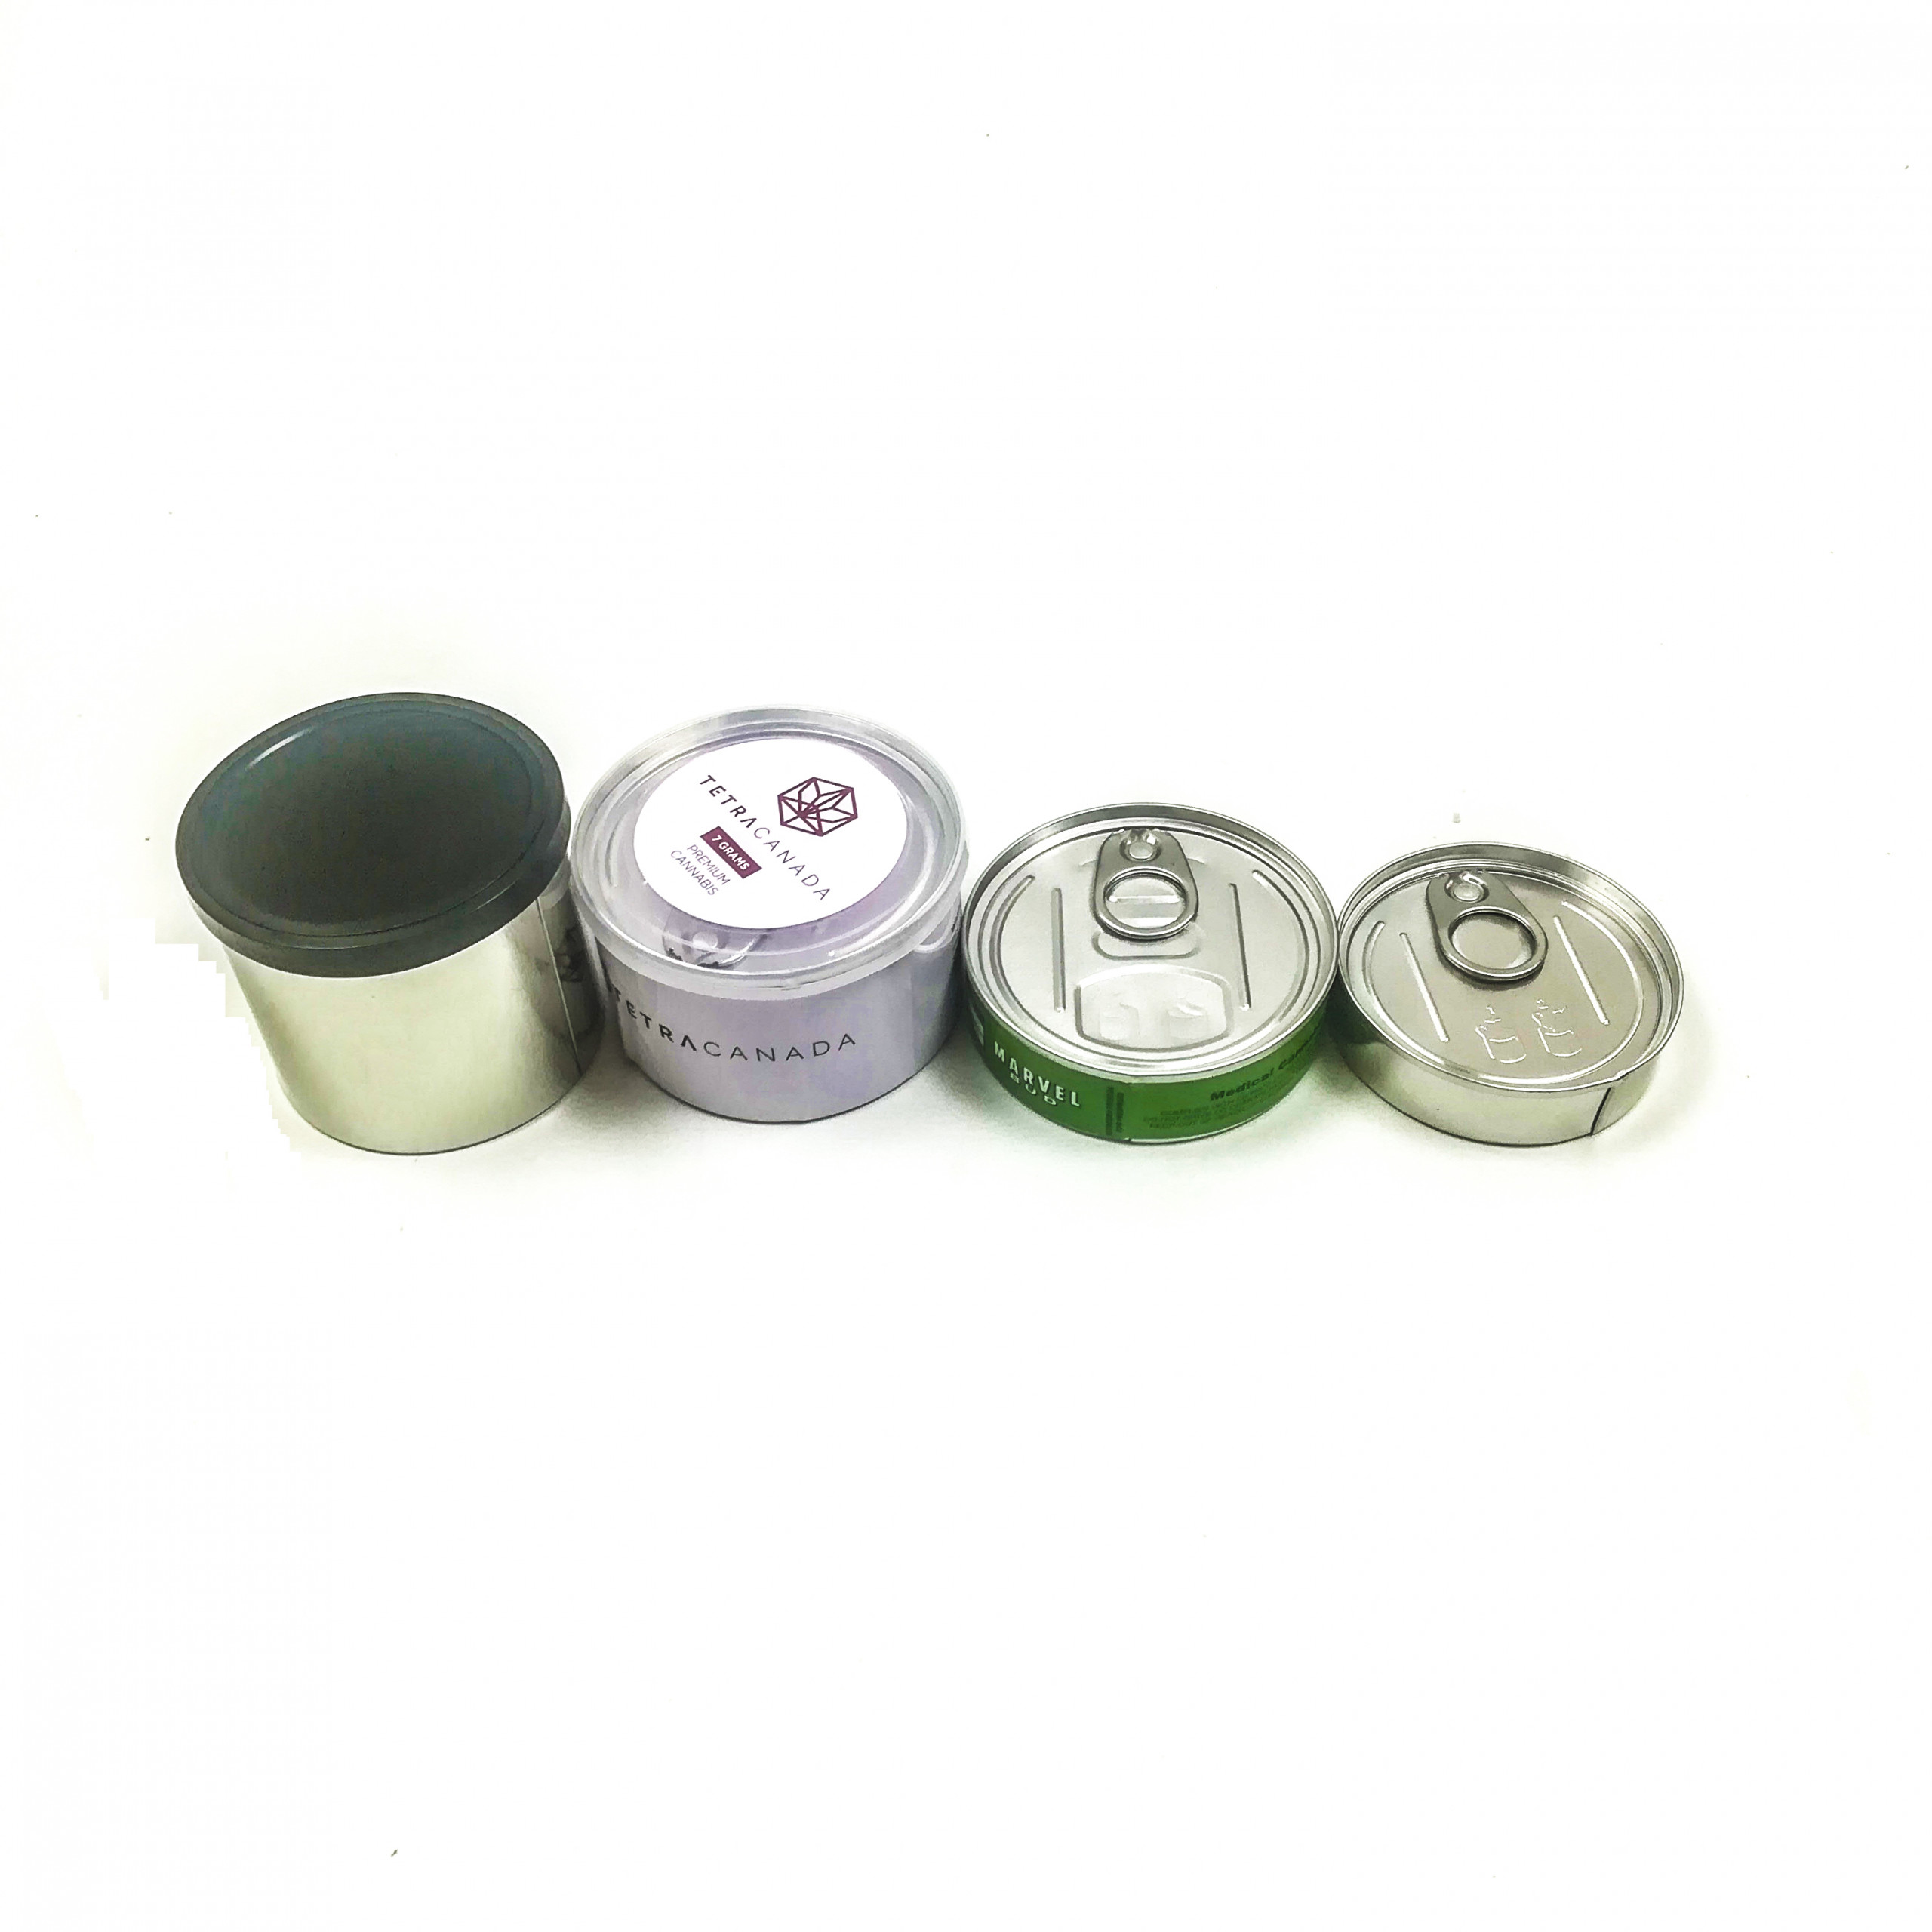 different sizes pressitin tin cans with labels